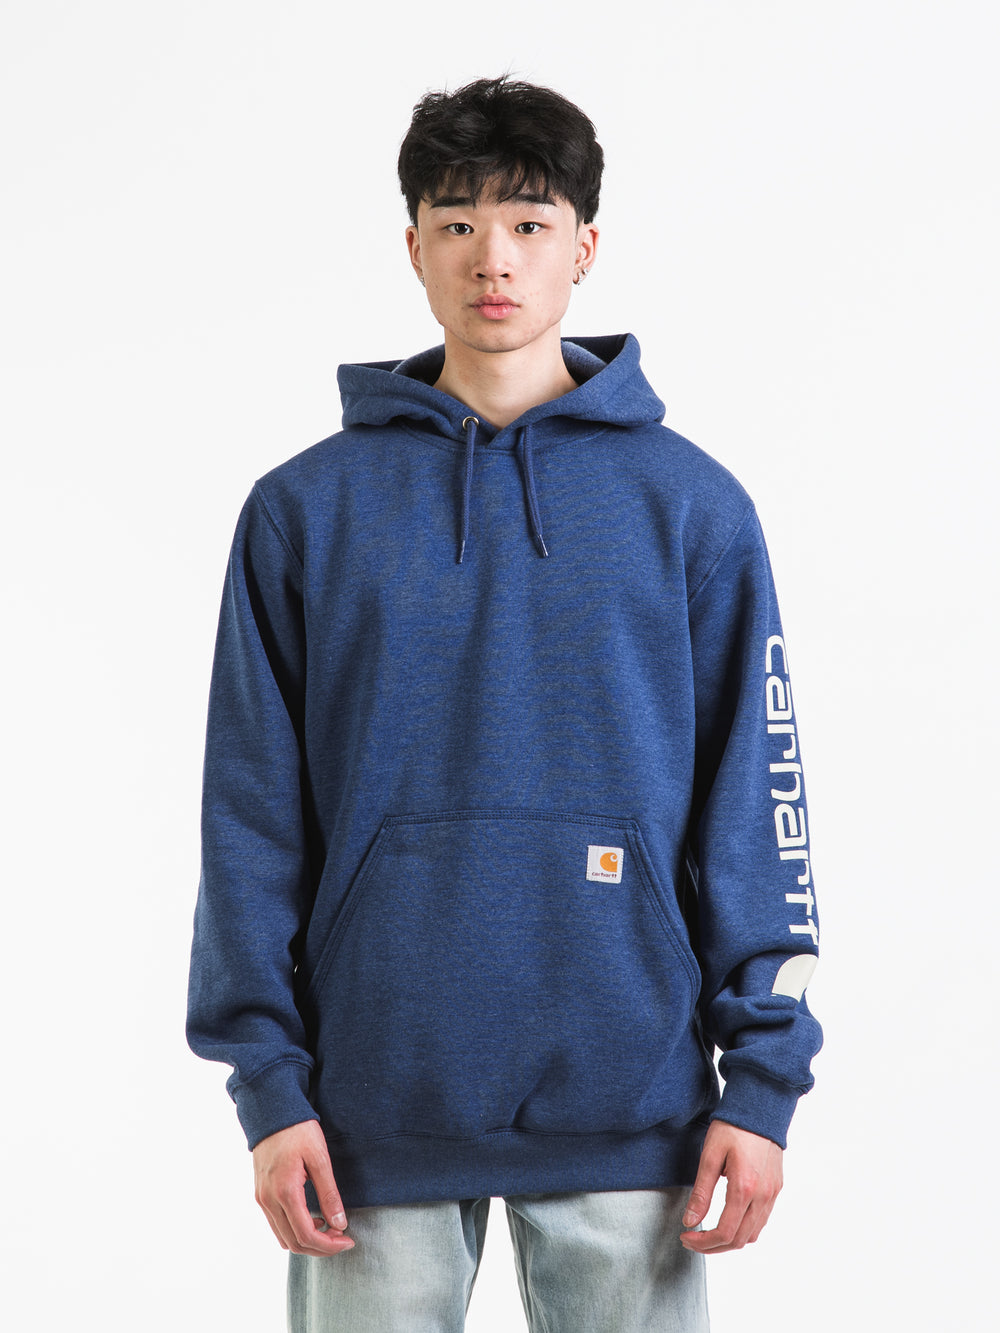 CARHARTT LOOSE FIT MIDWEIGHT LOGO SLEEVE HOODIE - CLEARANCE